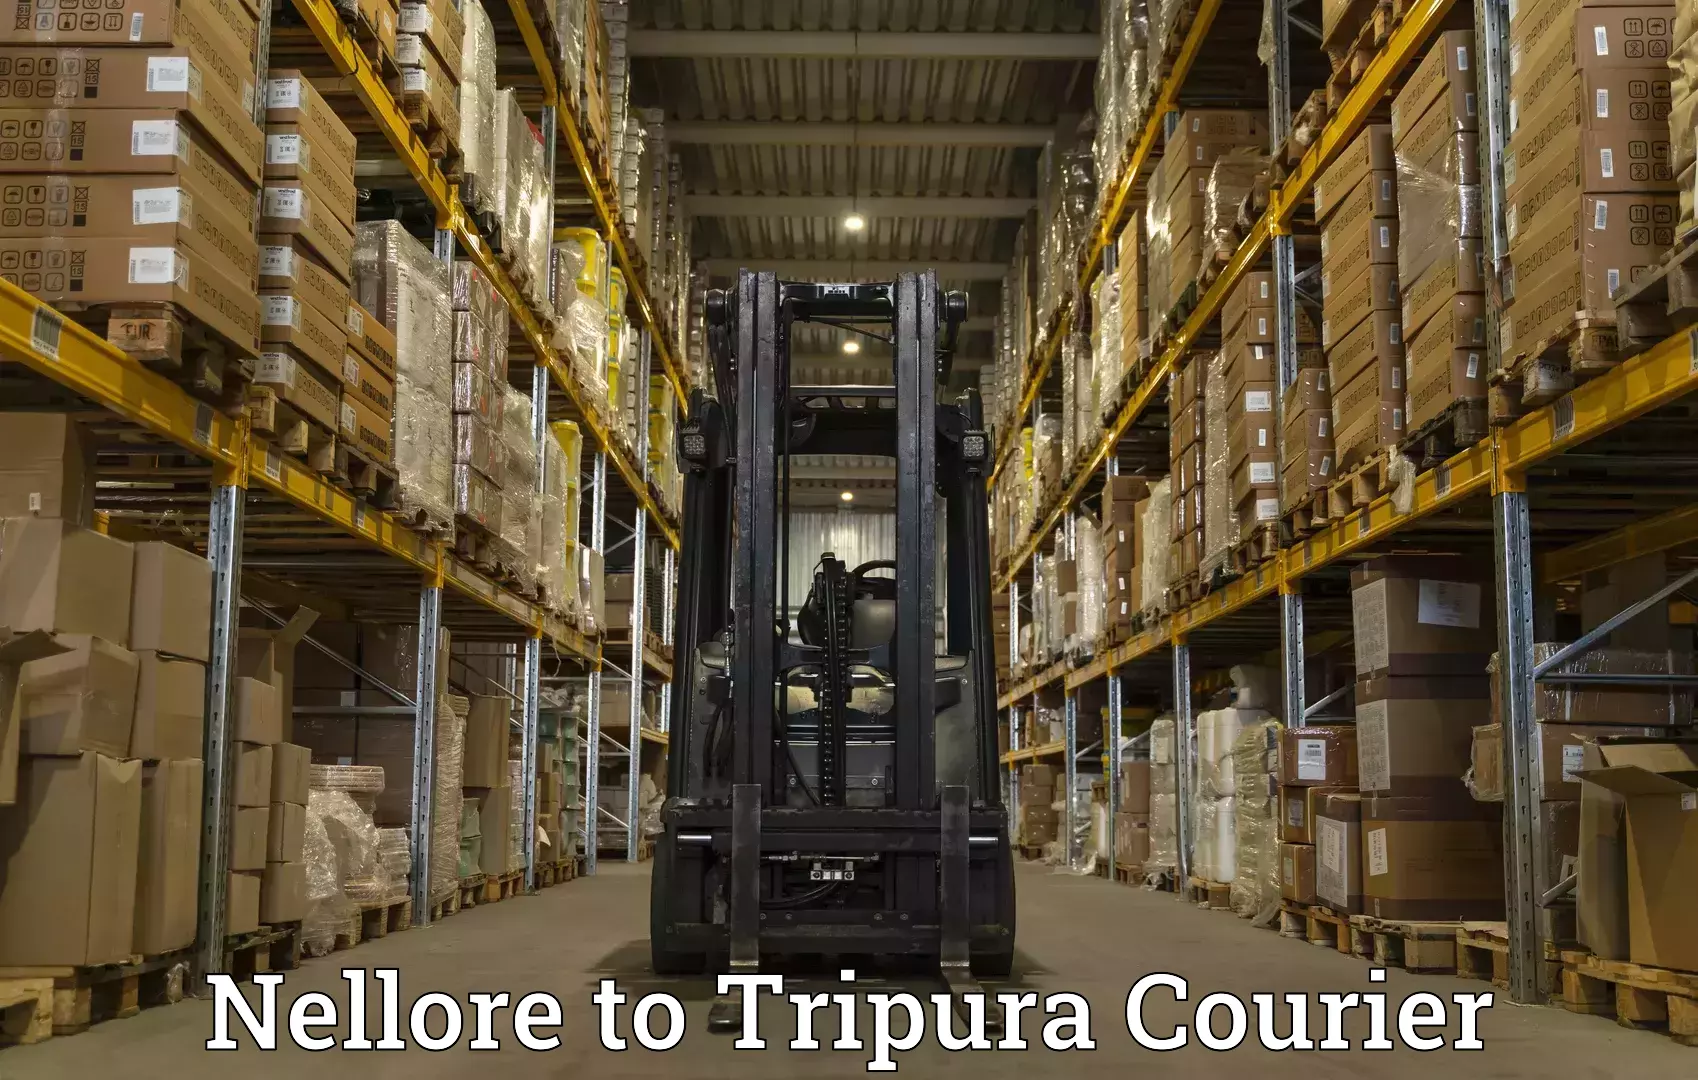 Automated shipping processes Nellore to Udaipur Tripura